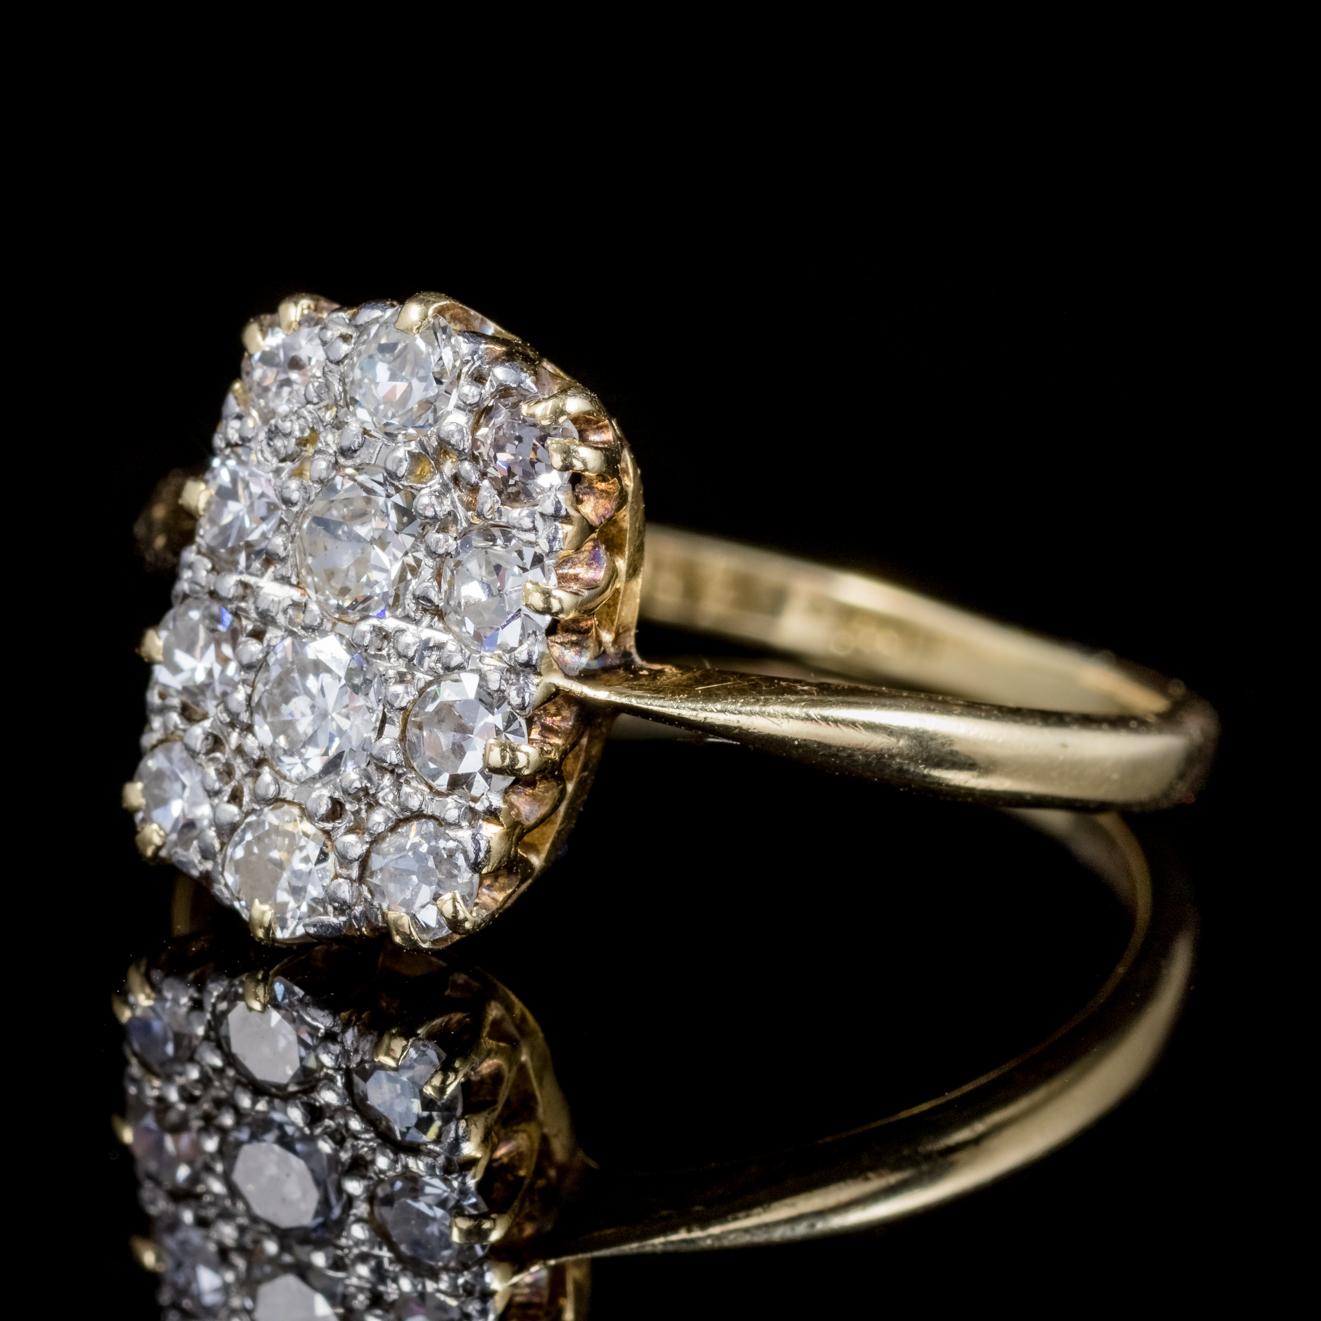 A spectacular antique 18ct Gold Diamond cluster ring from the Victorian era, Circa 1900. 

The ring is adorned with twelve glistening Diamonds, approx. 0.84ct in total across the face. 

Diamonds sparkle continuously and beautifully captivating the